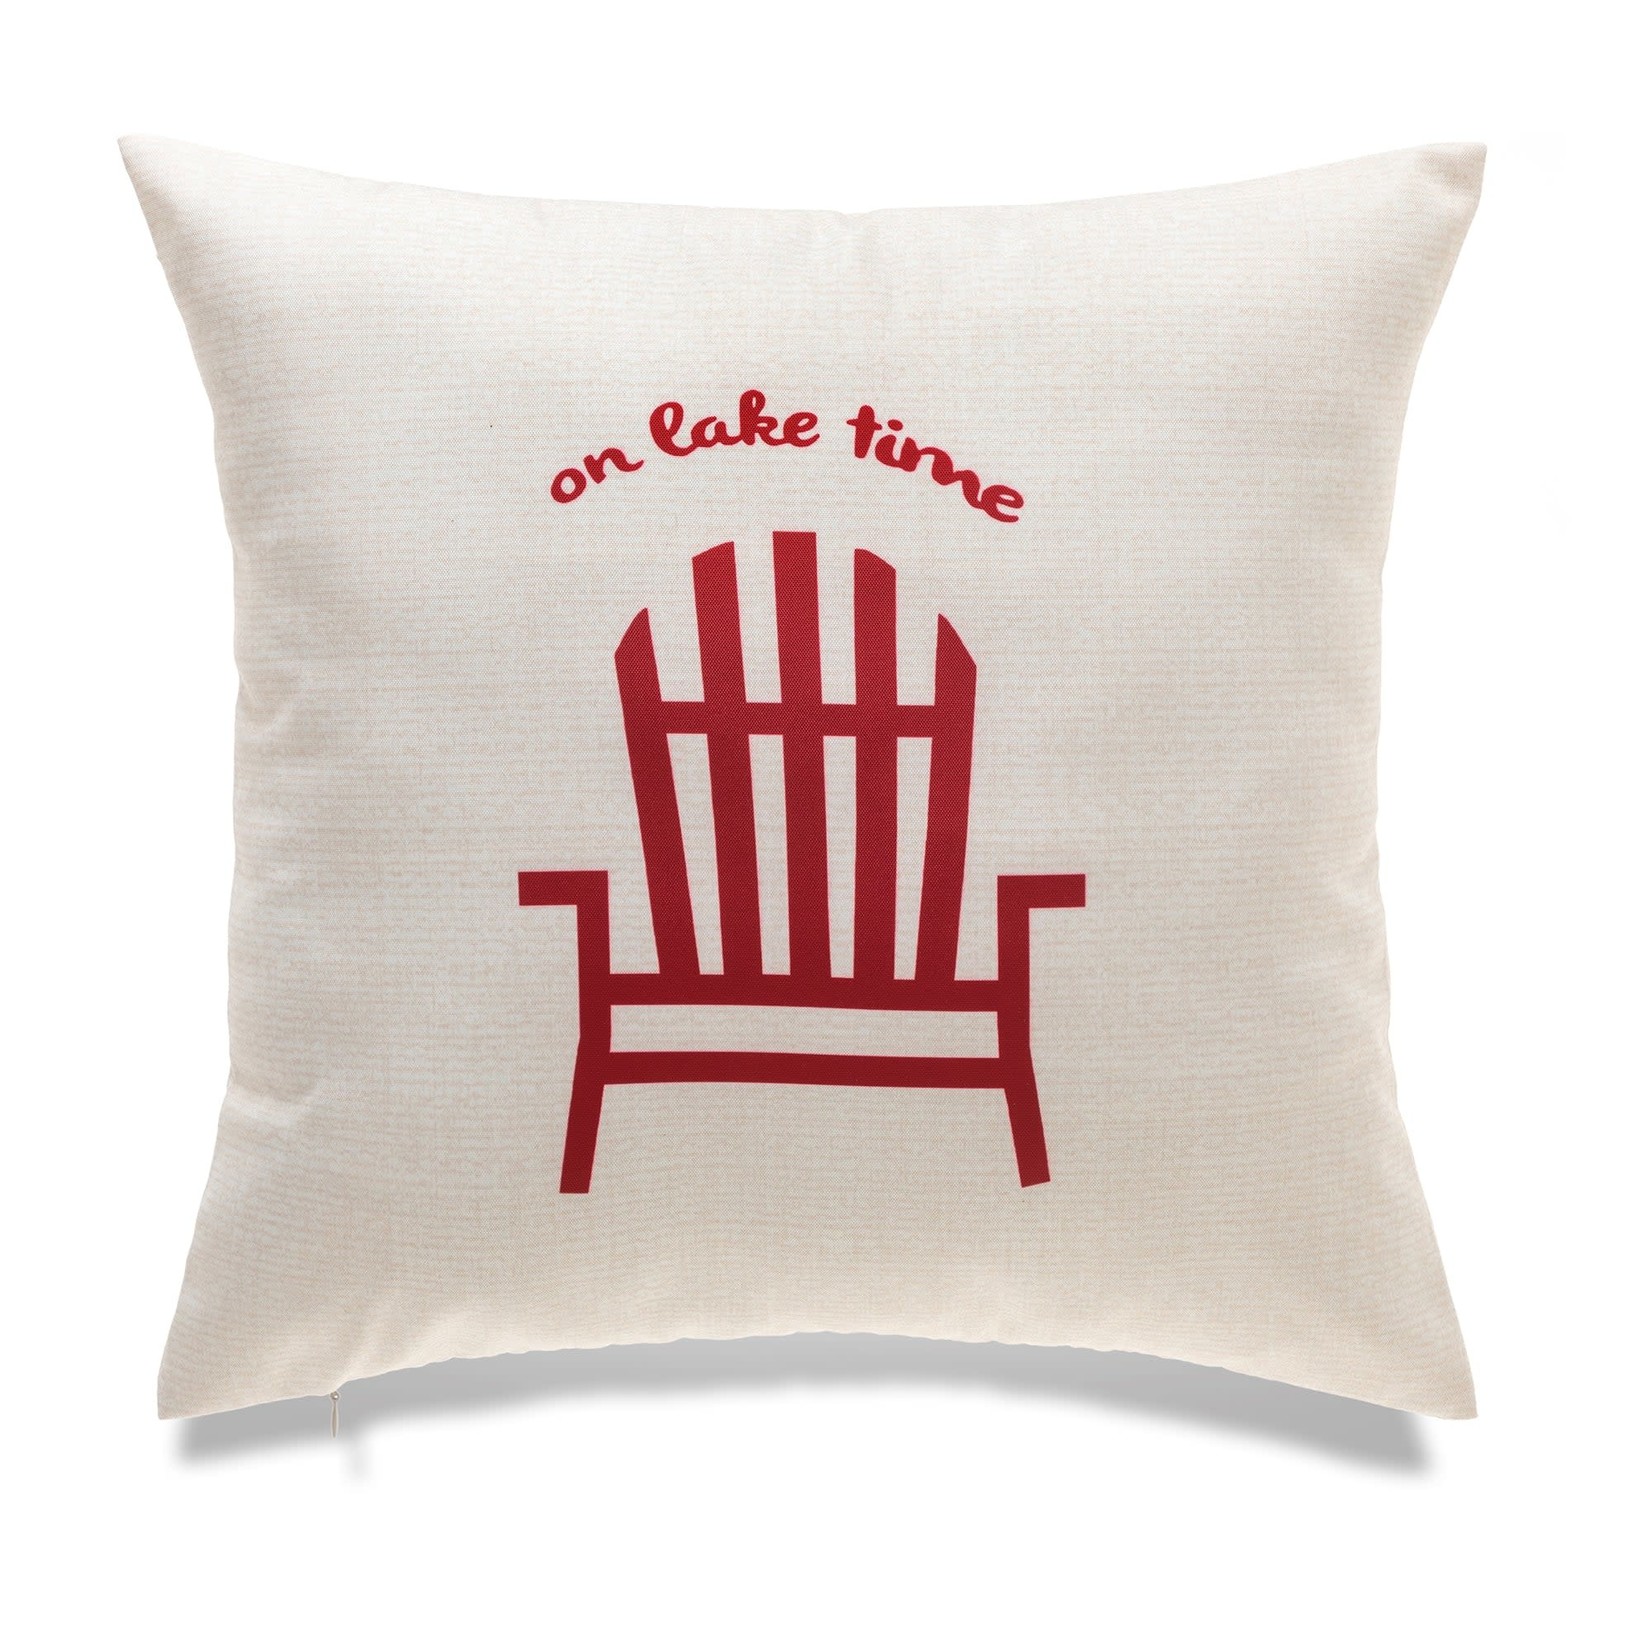 Pillow - Outdoor On Lake Time Red 18x18"